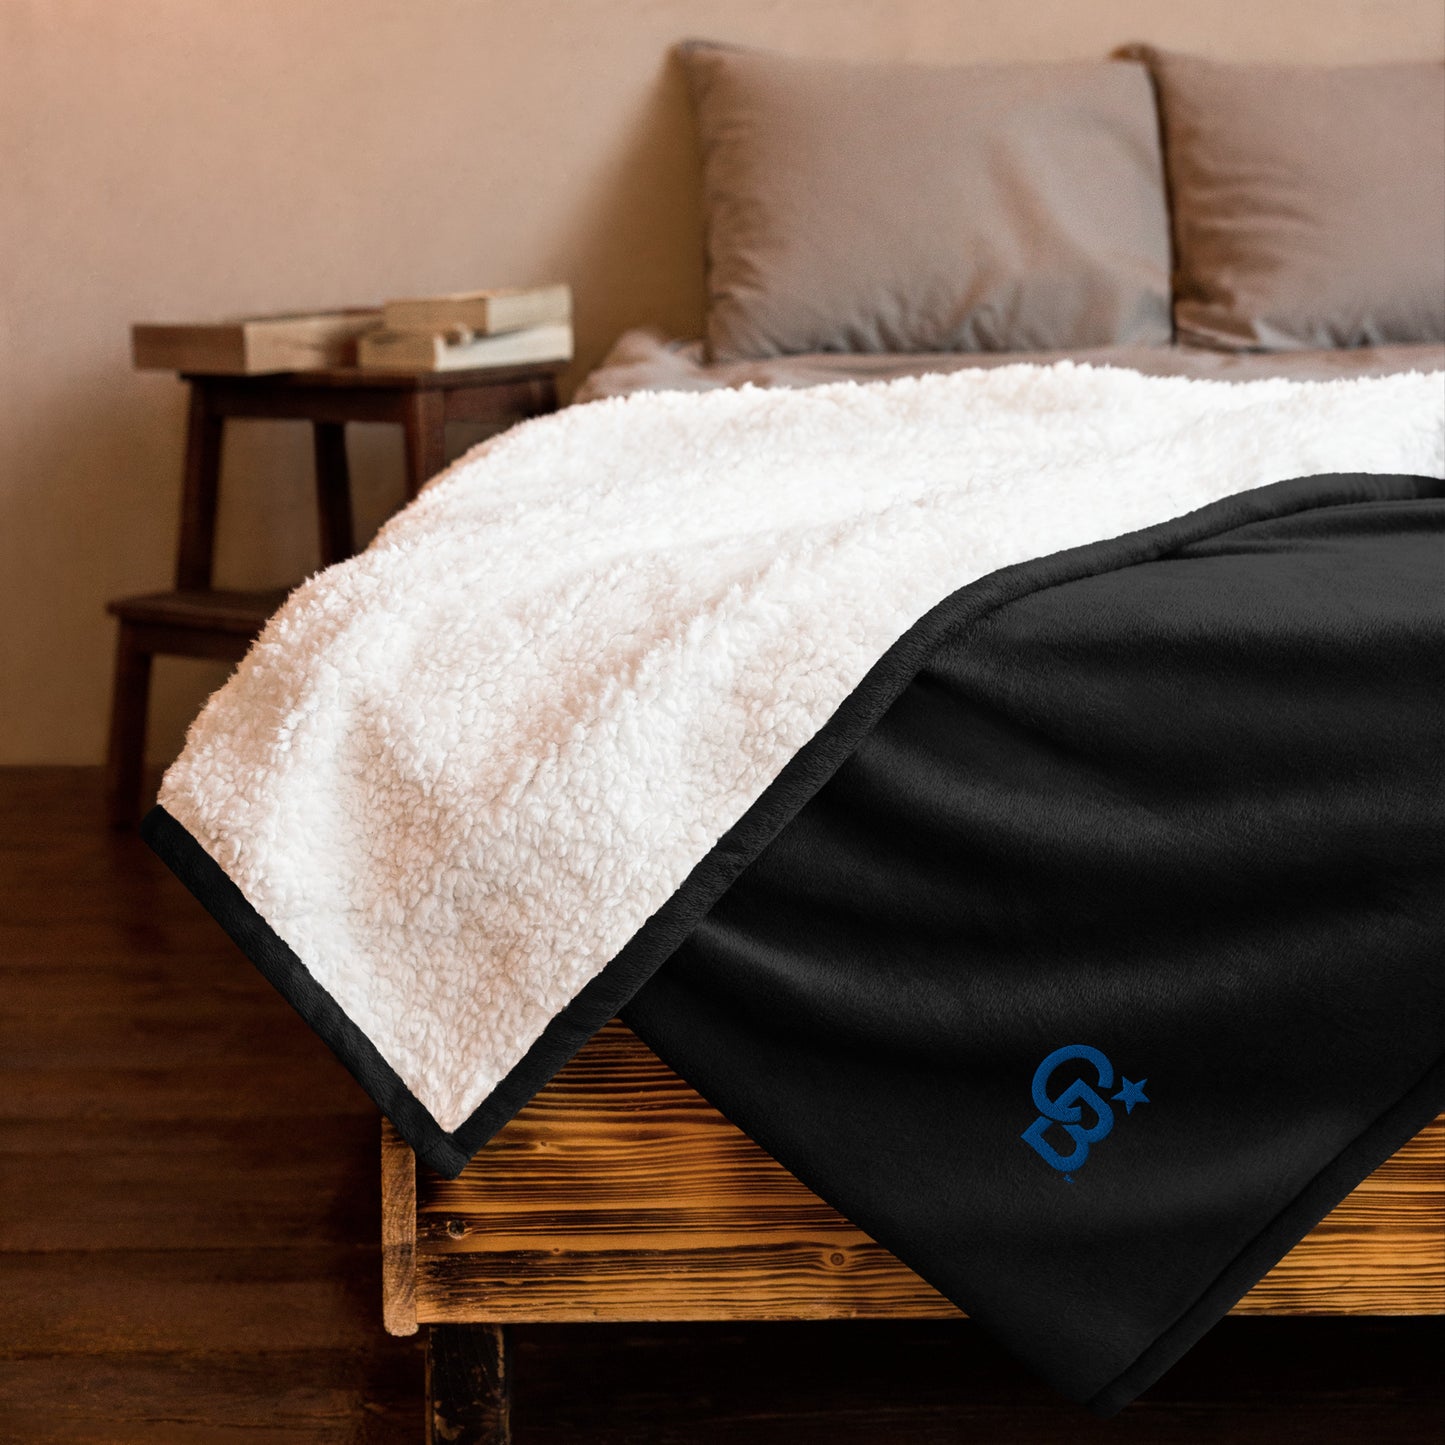 Coldwell Banker Premium sherpa blanket (from $$91 per complete box)